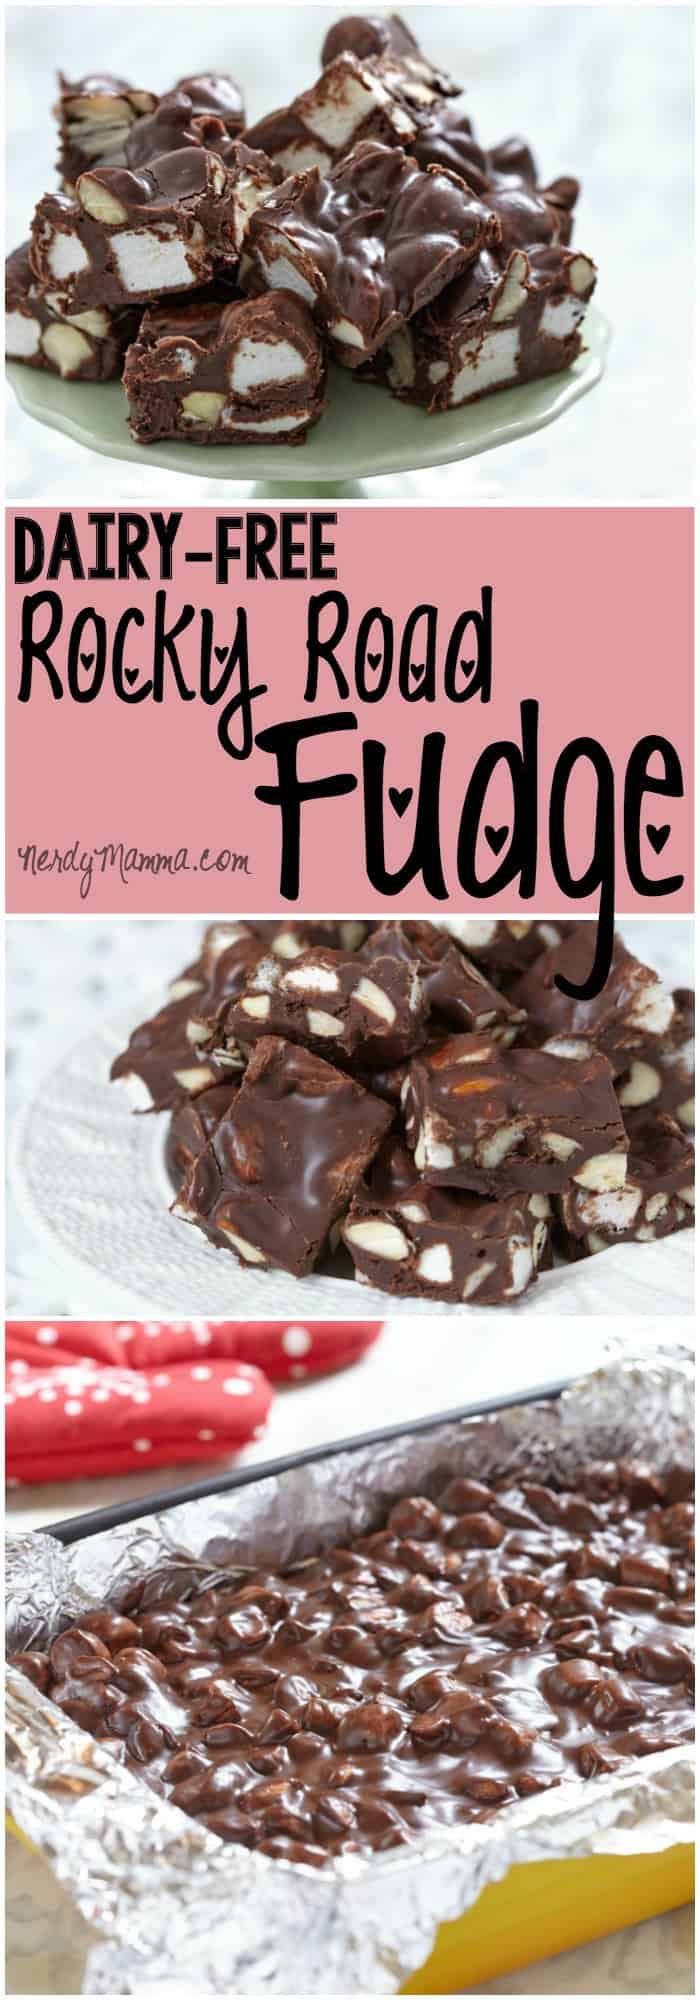 I cannot believe this awesome recipe for dairy-free rocky road fudge. I mean, fudge without dairy...how awesome is that!